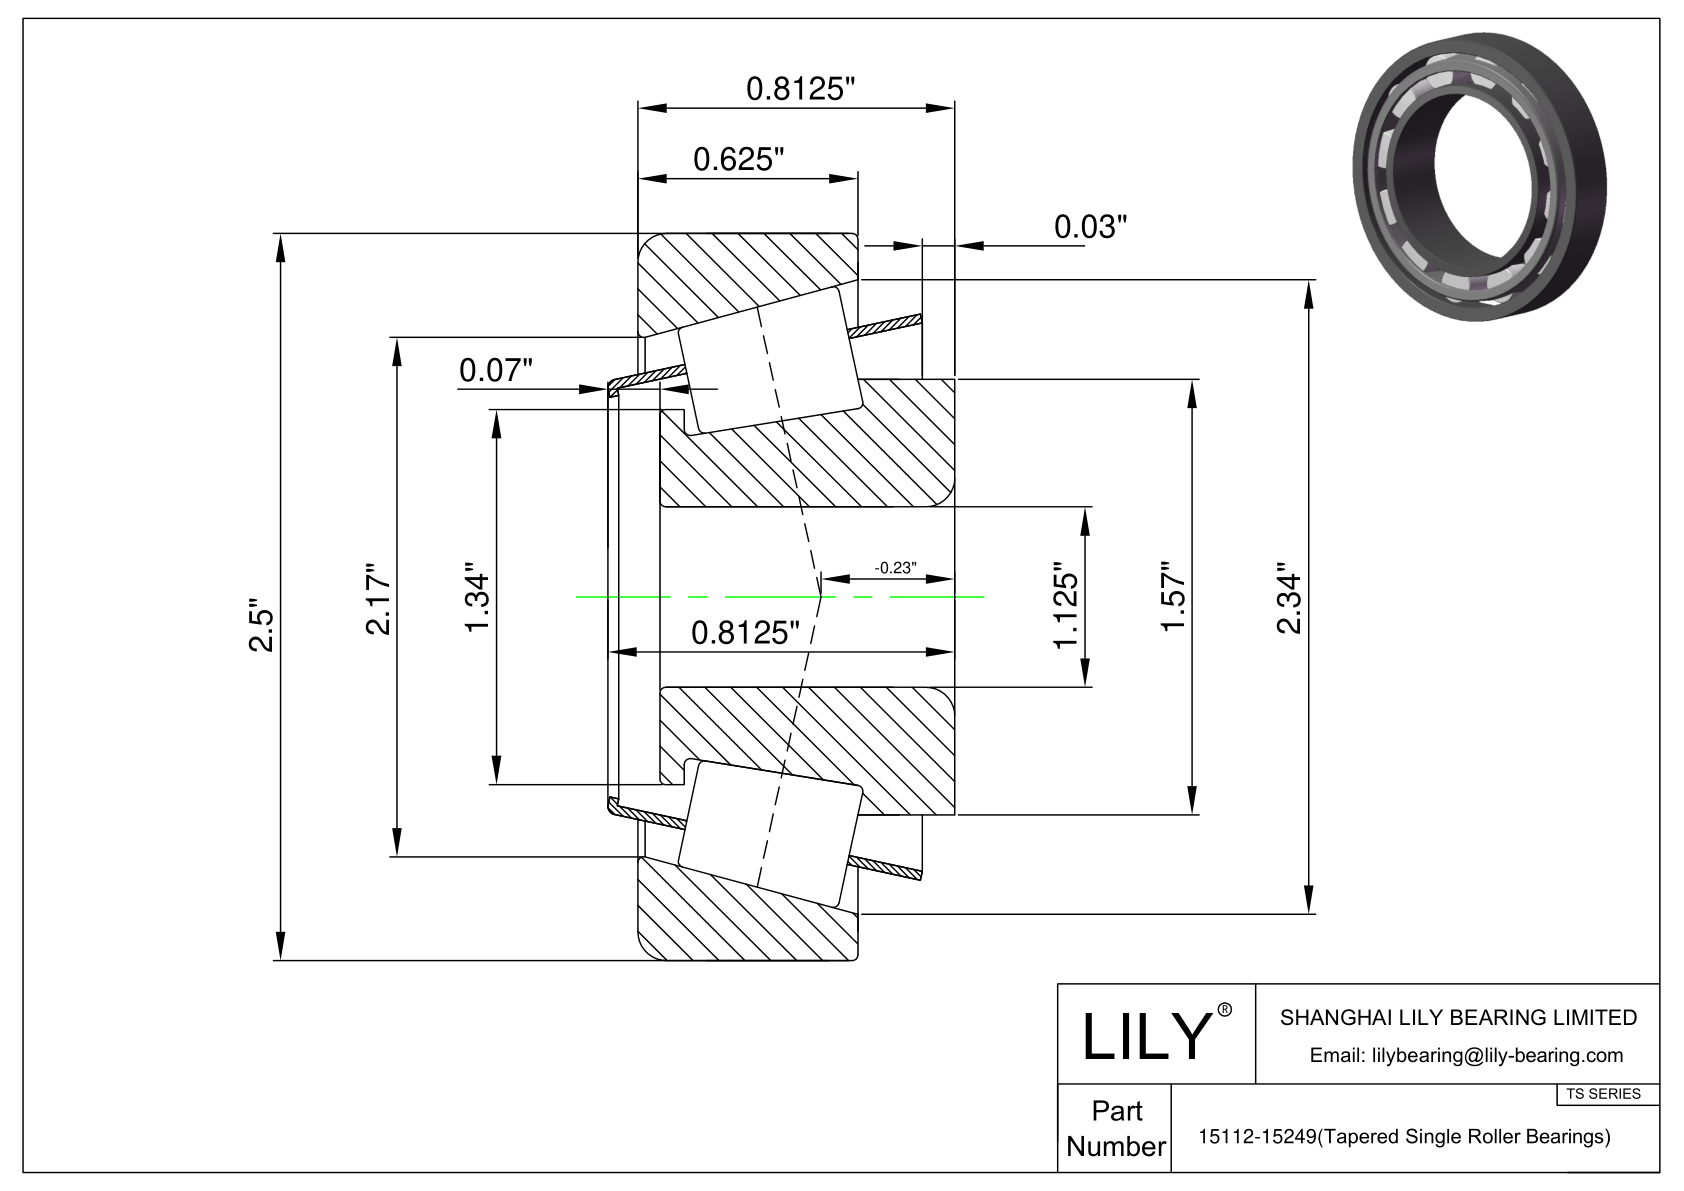 15112-15249 TS (Tapered Single Roller Bearings) (Imperial) cad drawing